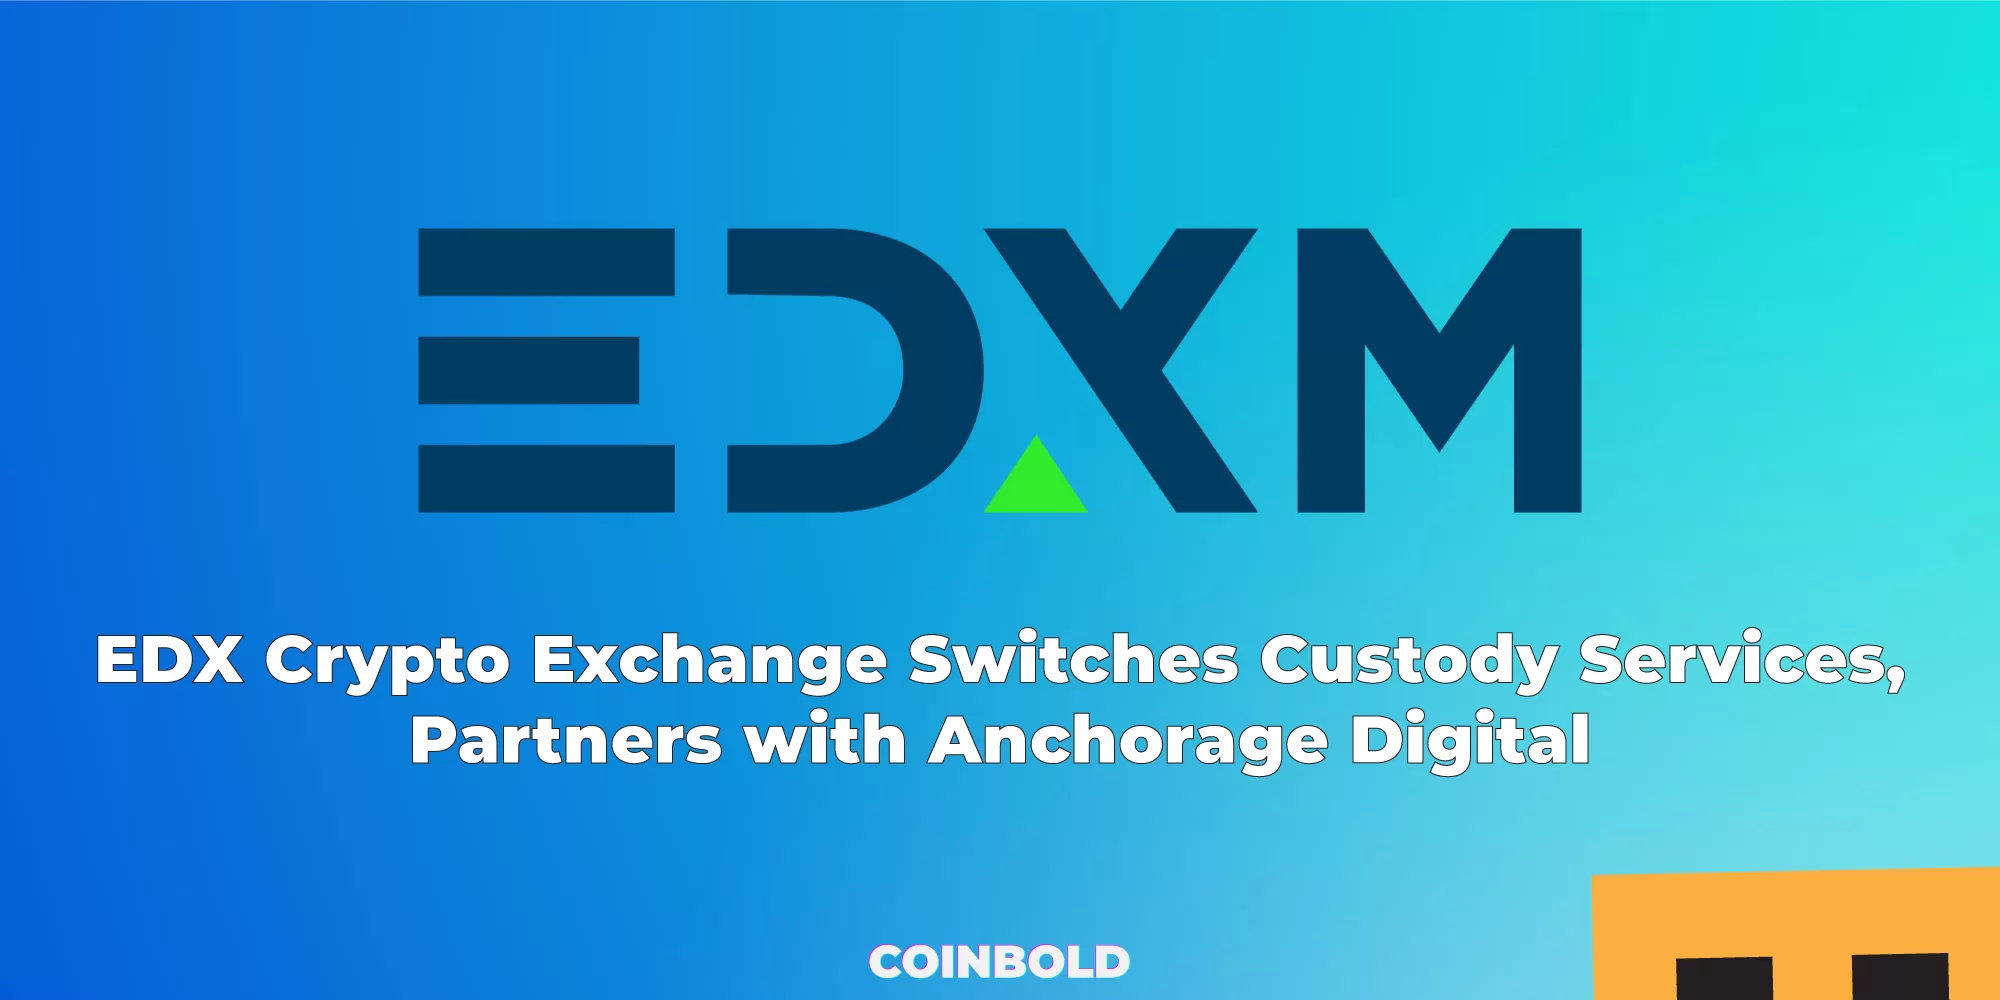 EDX Crypto Exchange Switches Custody Services, Partners with Anchorage Digital